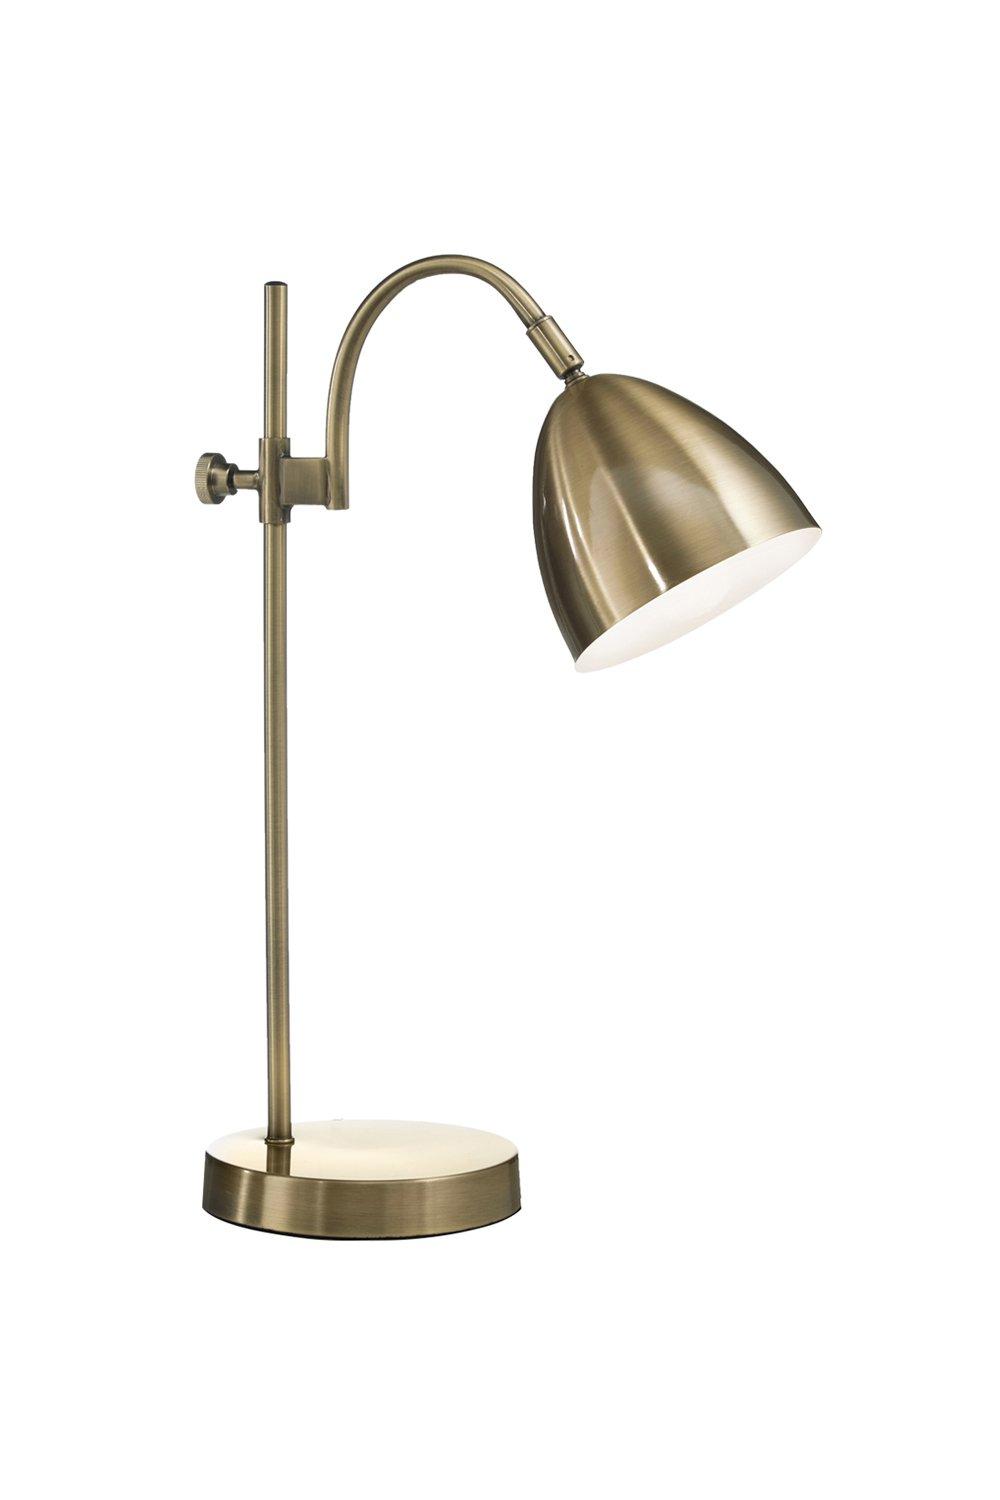 'Seb' Table Lamp and Antique Brass